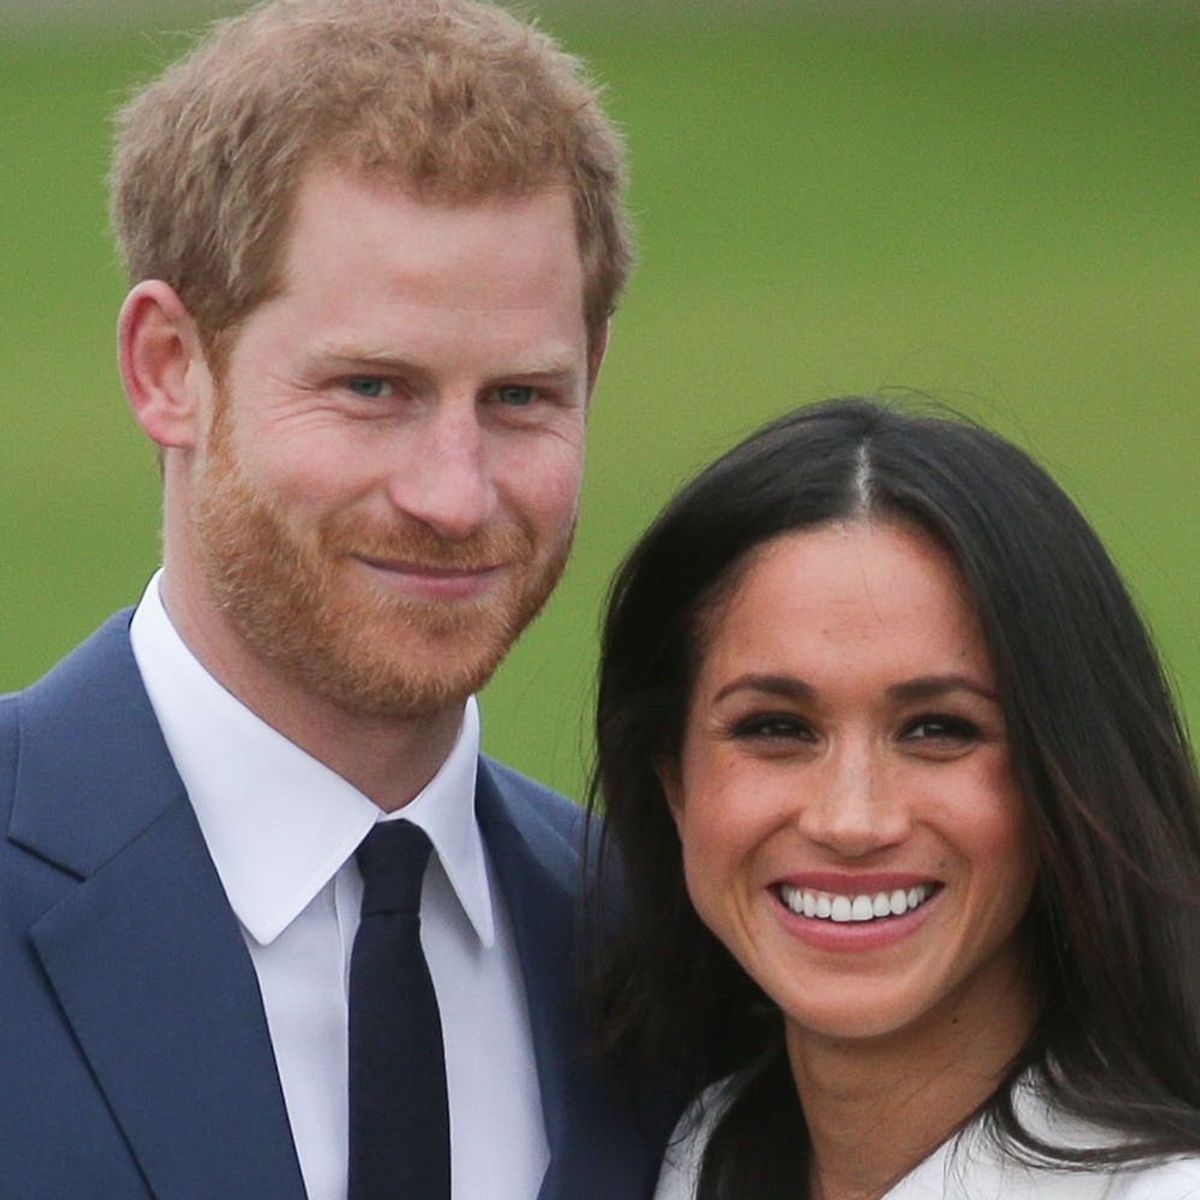 Meghan Markle’s Engagement Ring Has a Sweet Sentimental Detail